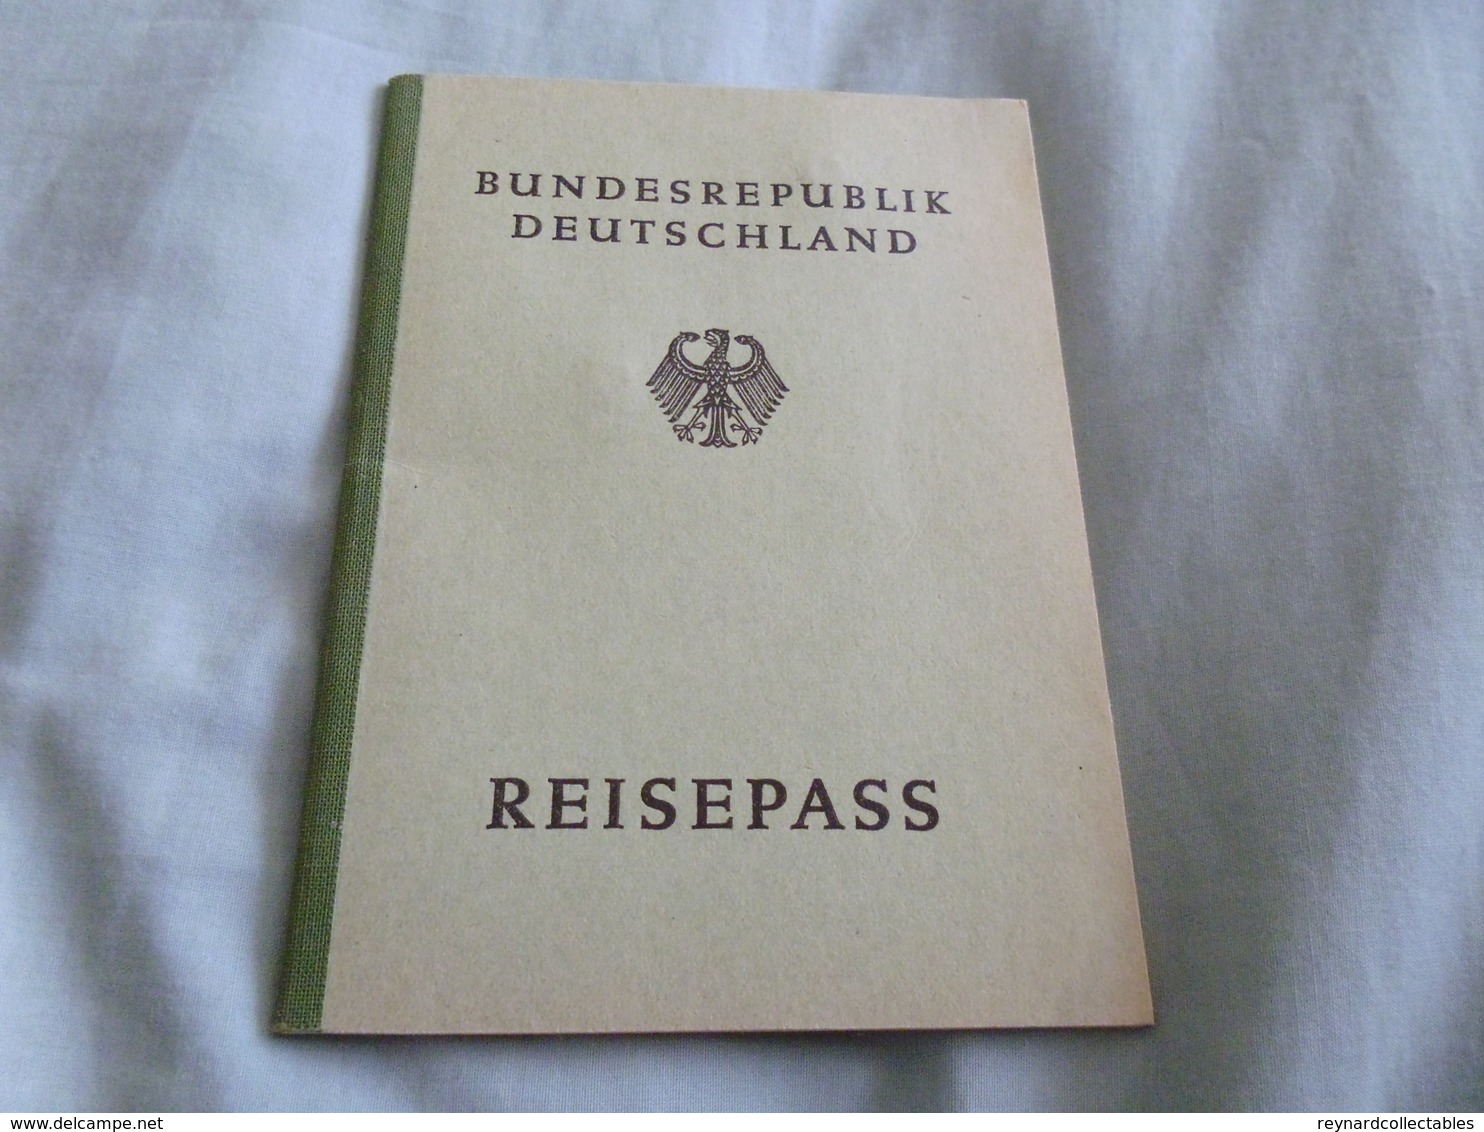 1954 Germany Reisepass Passport Issued Berlin Steglitz, With Fiscals, No Visas - Historical Documents